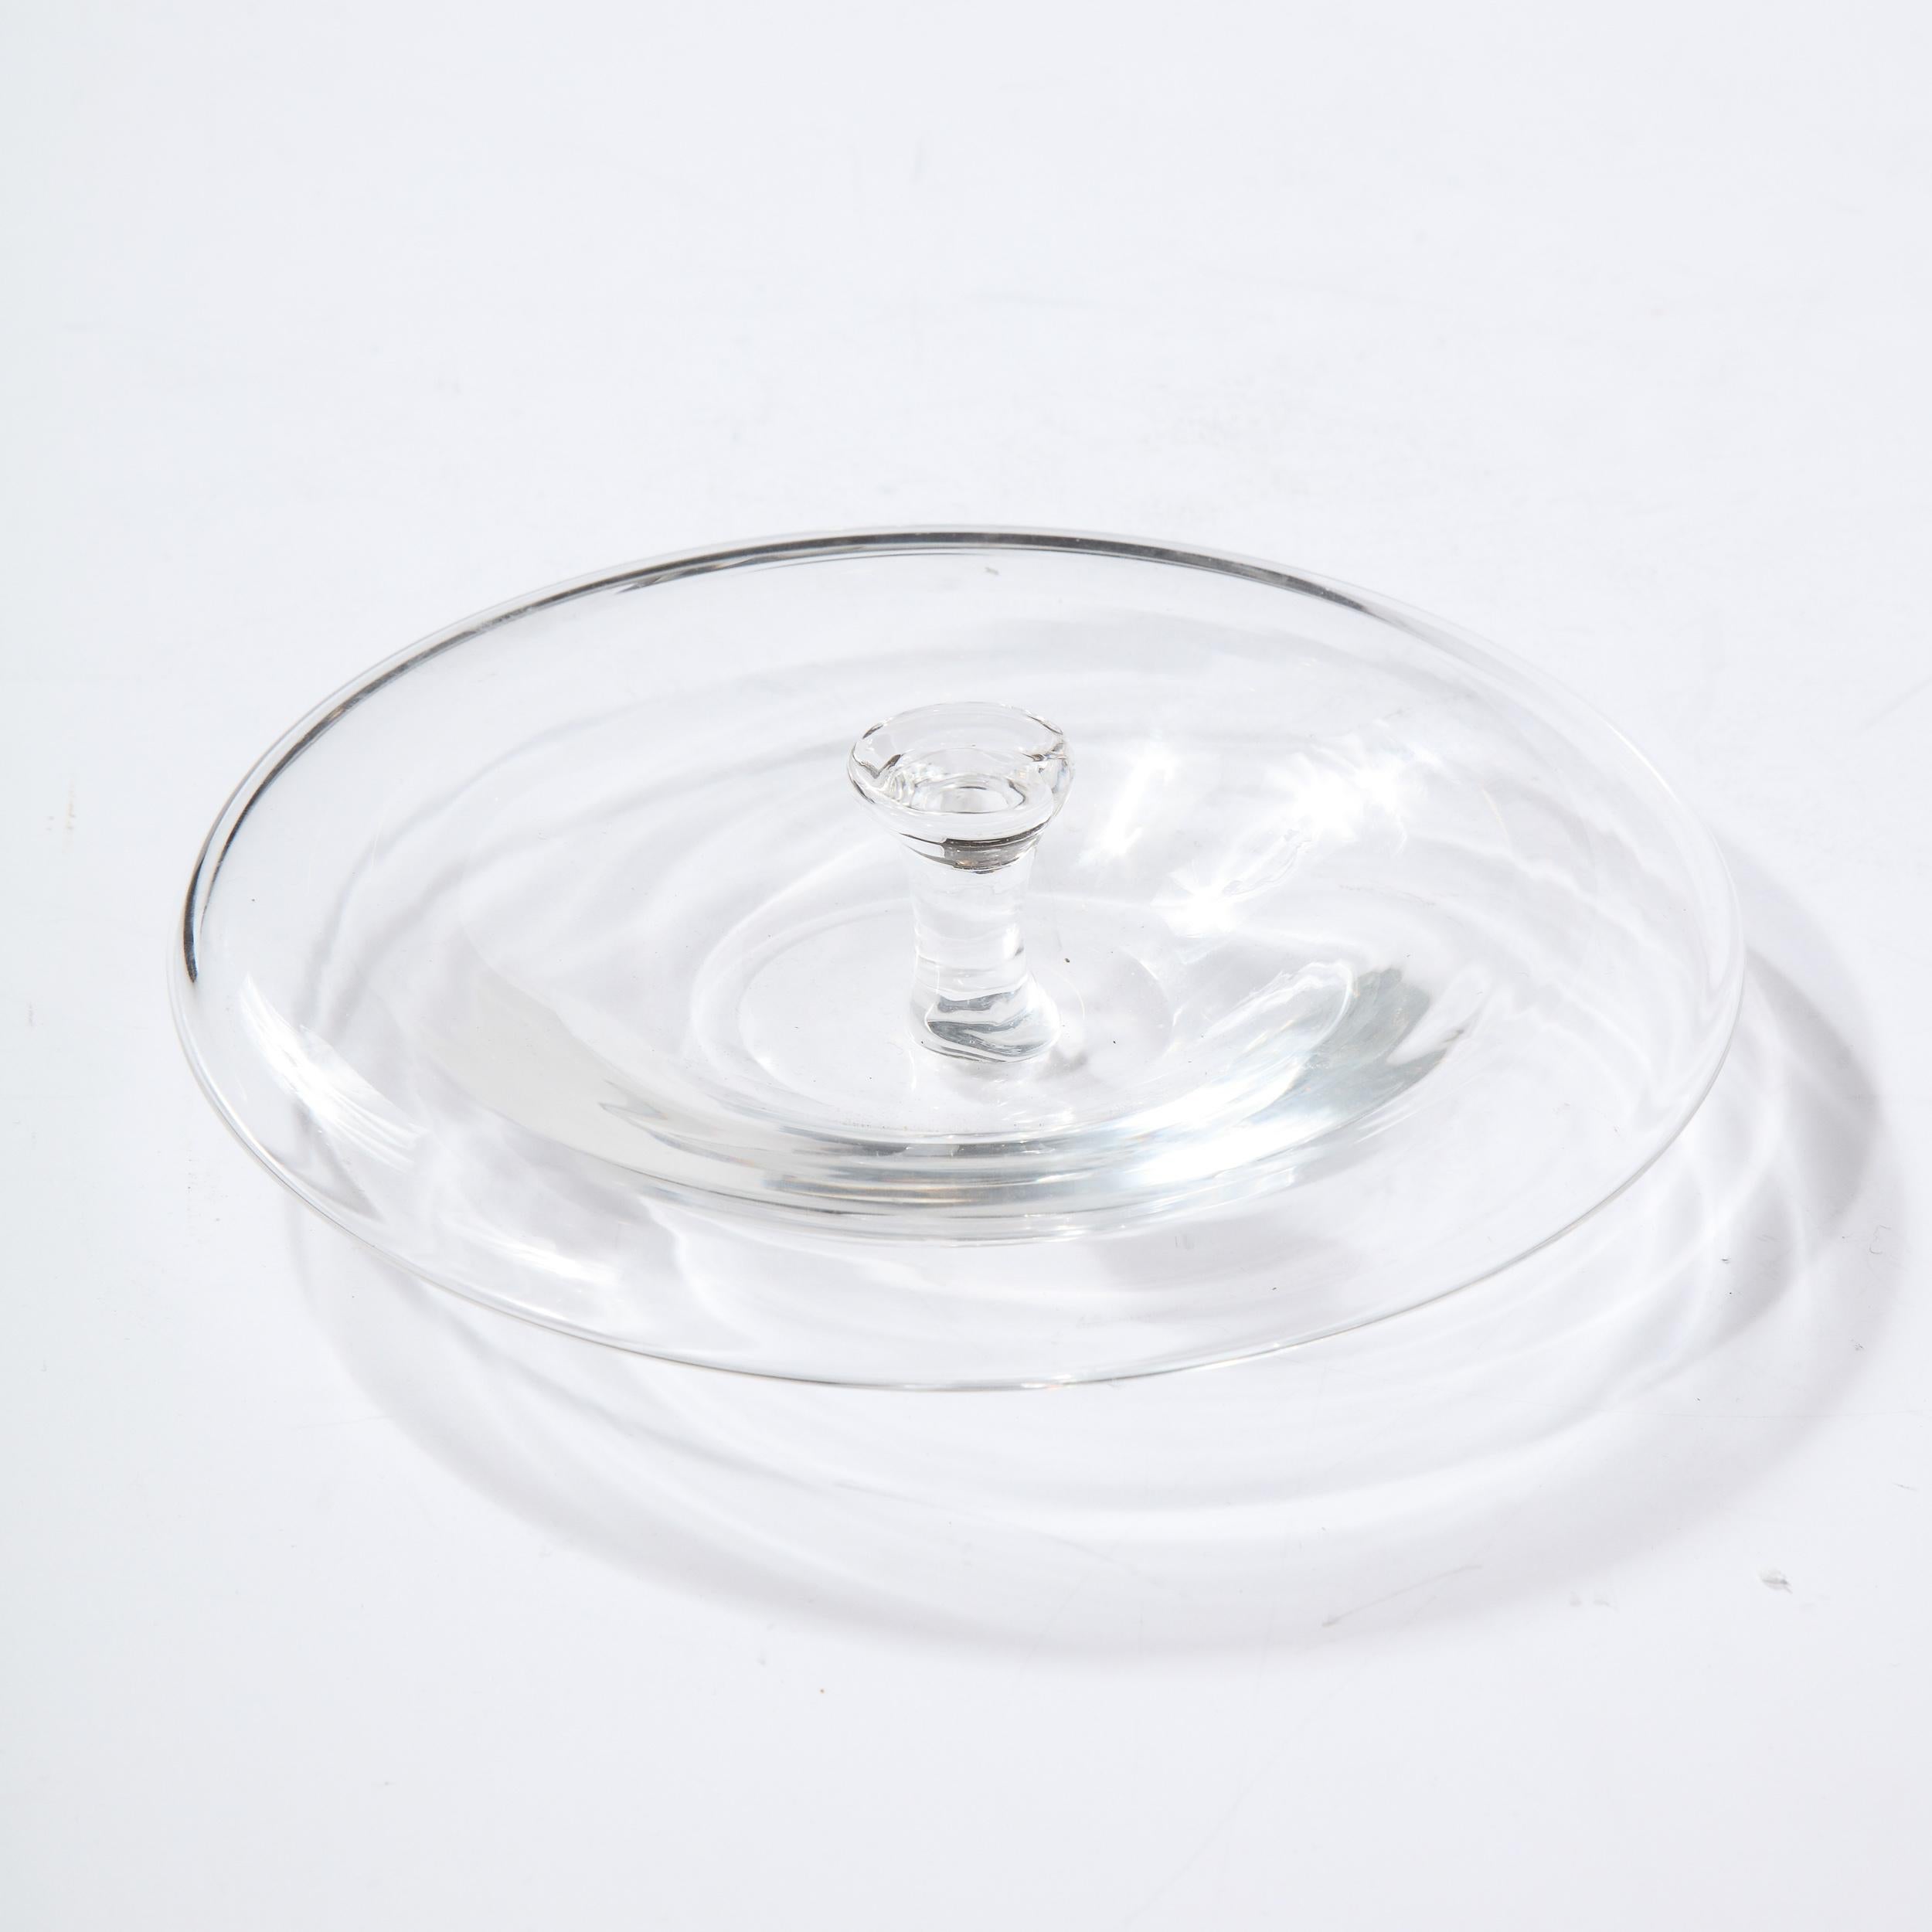 Late 20th Century Mid-Century Modern Translucent Glass Decorative Dish by Elsa Peretti for Tiffany For Sale